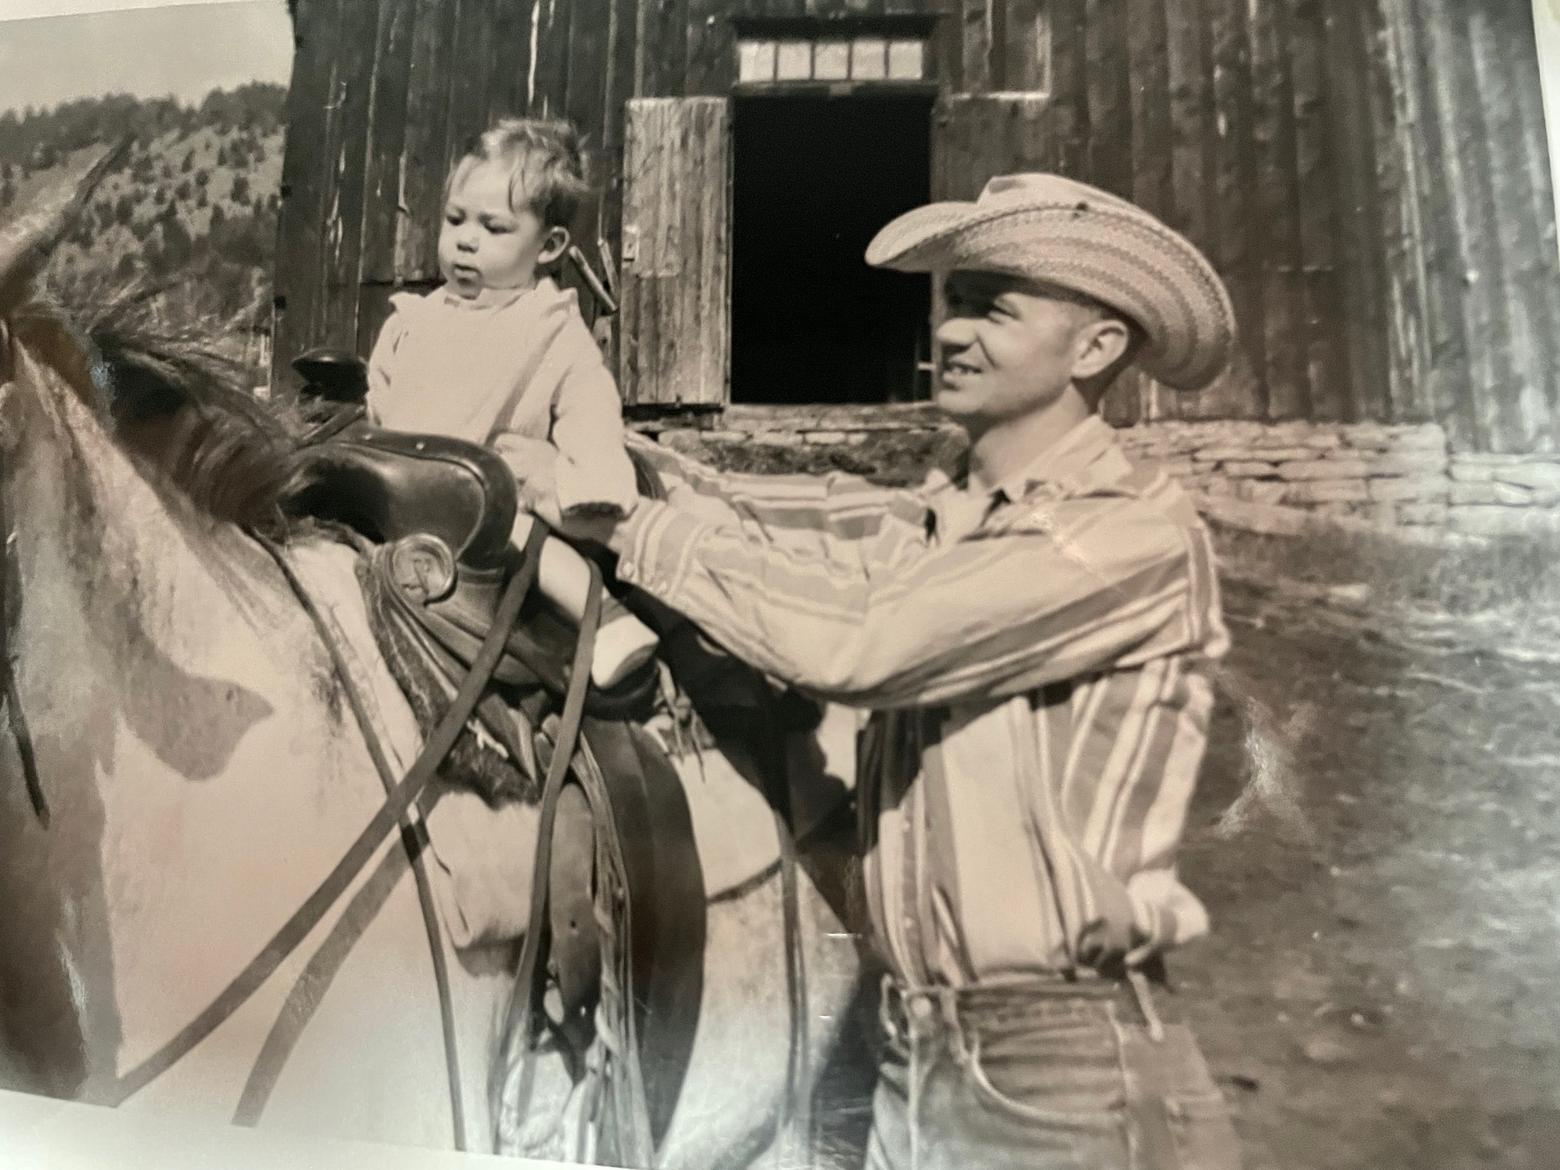 Rowland's father, right, was a school teacher but he knew his way around a horse and helped out rancher friends and neighbors whenever they needed it. Here, he puts his toddler son, Rowland, in the saddle. Photo courtesy Russell Rowland